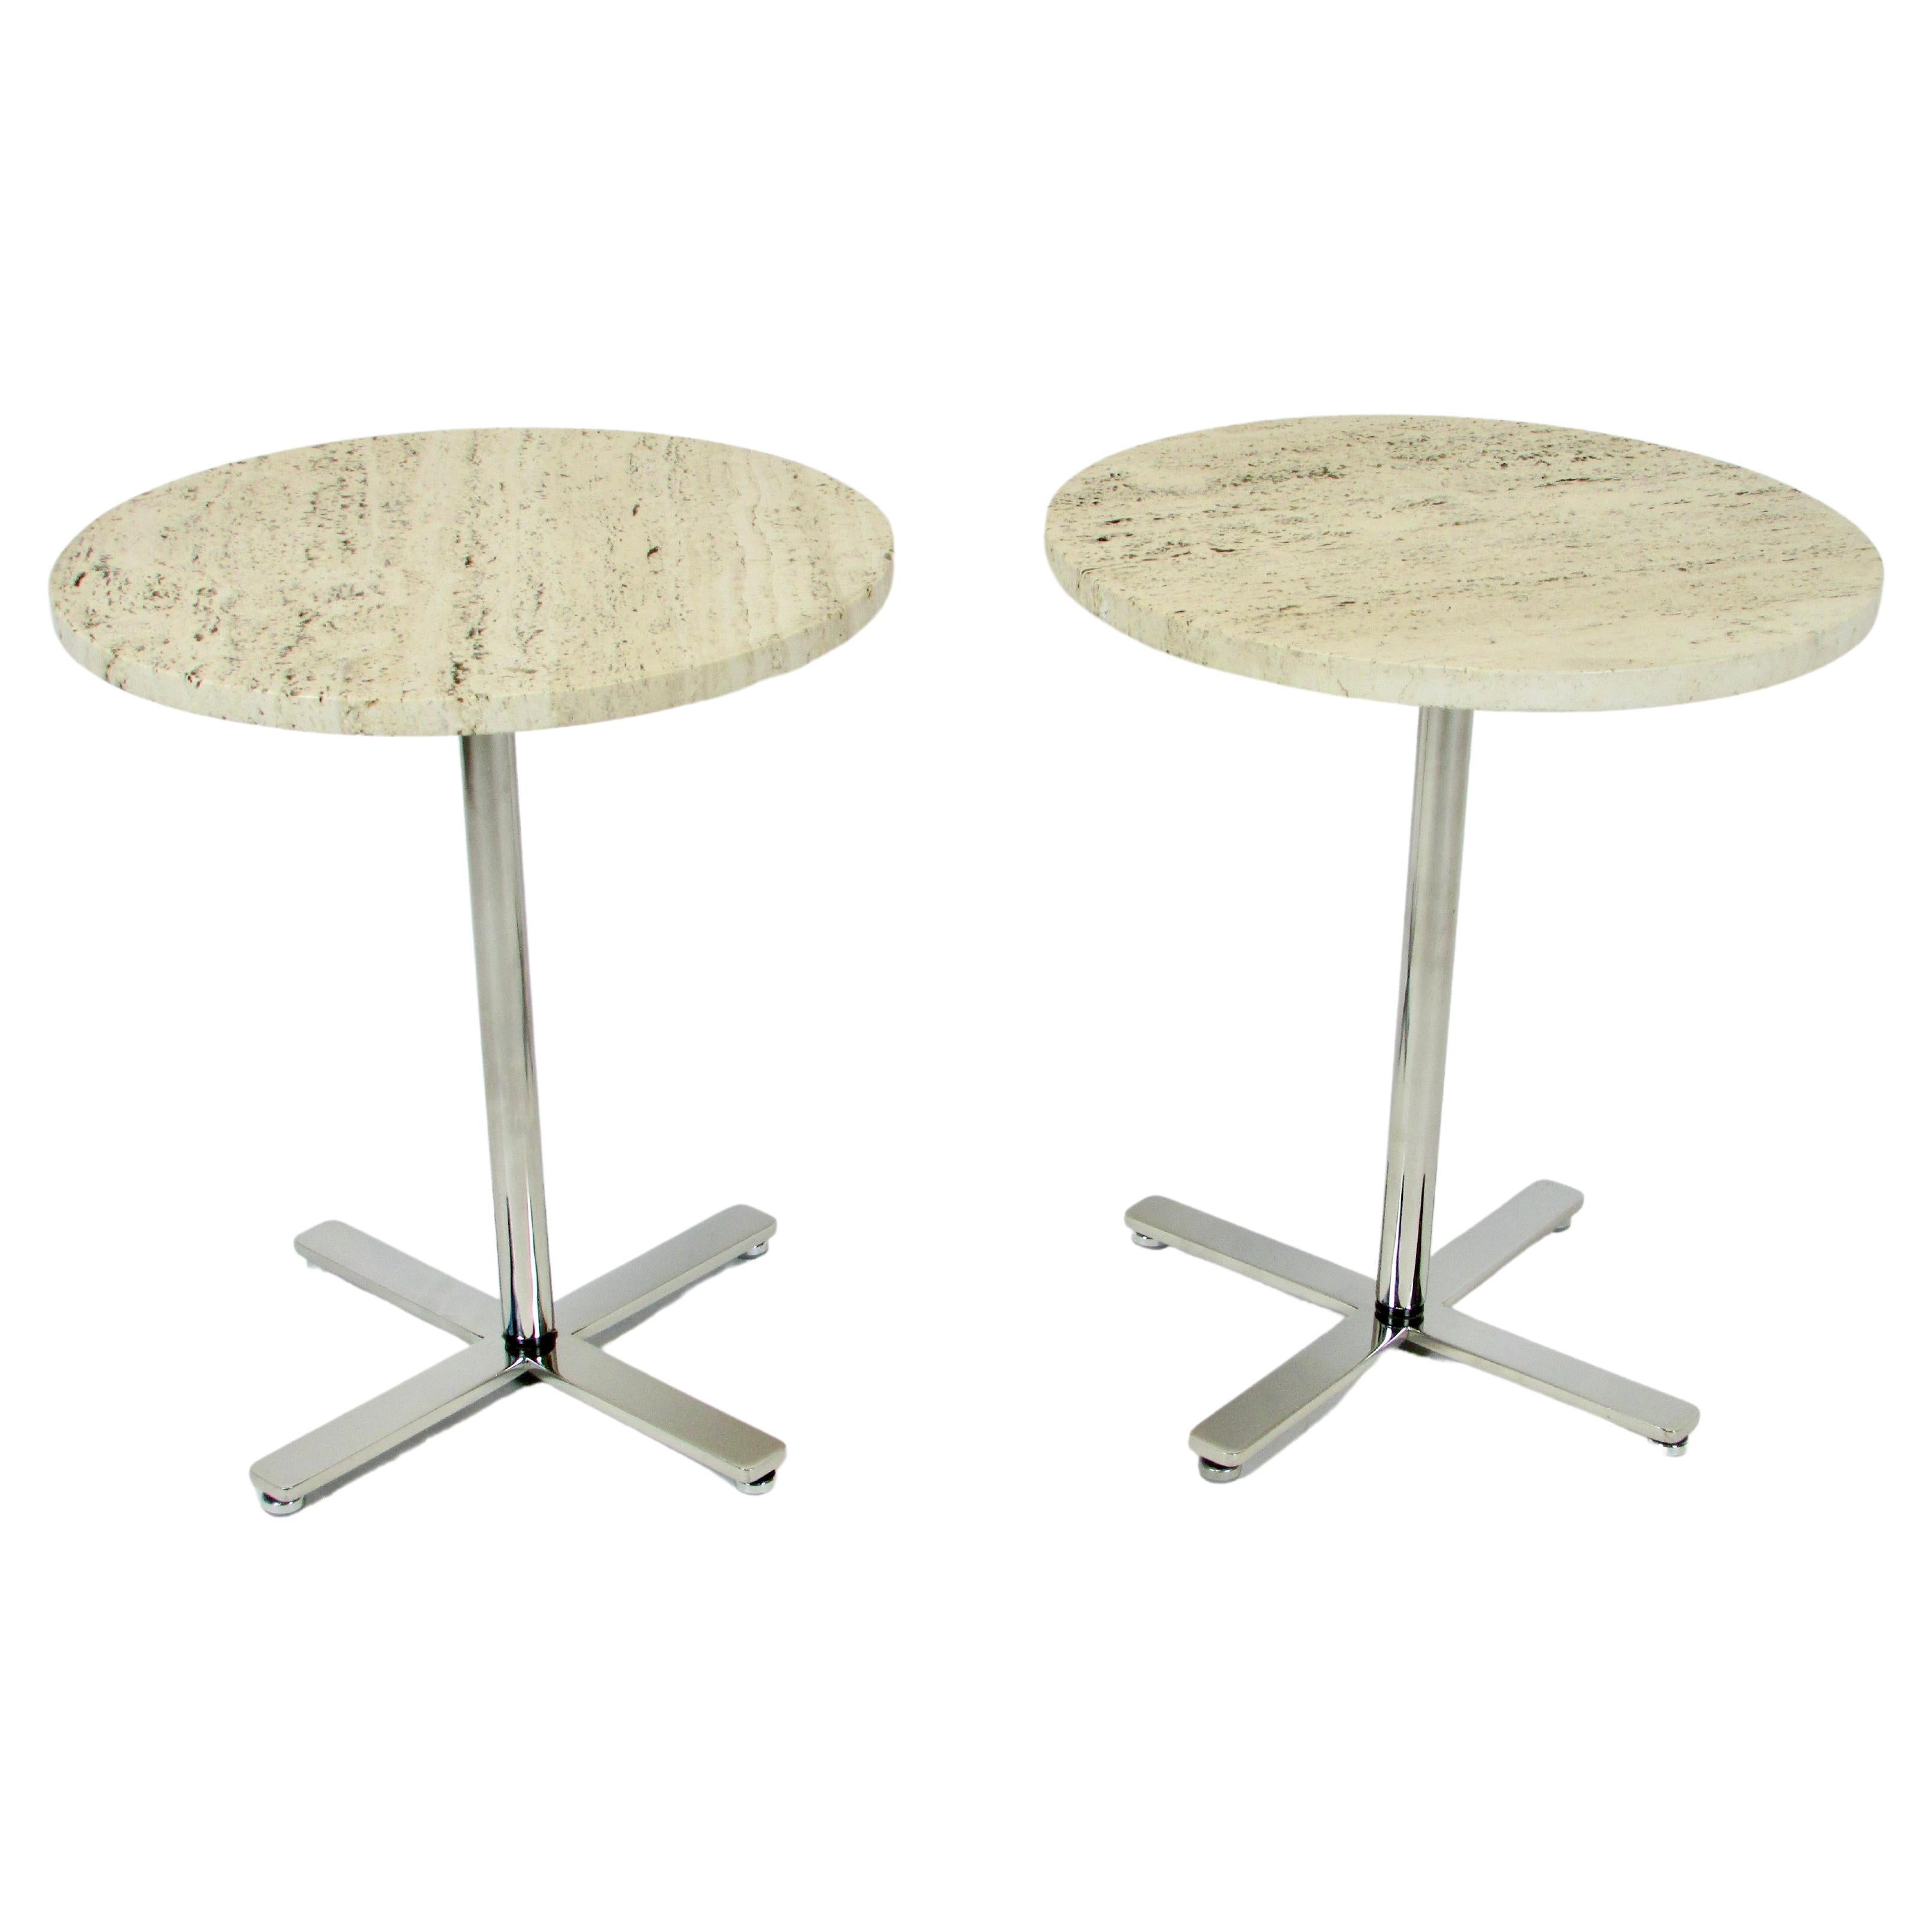 Pair of Helikon Open Grain Travertine Marble on Stainless Steel Base Tables For Sale